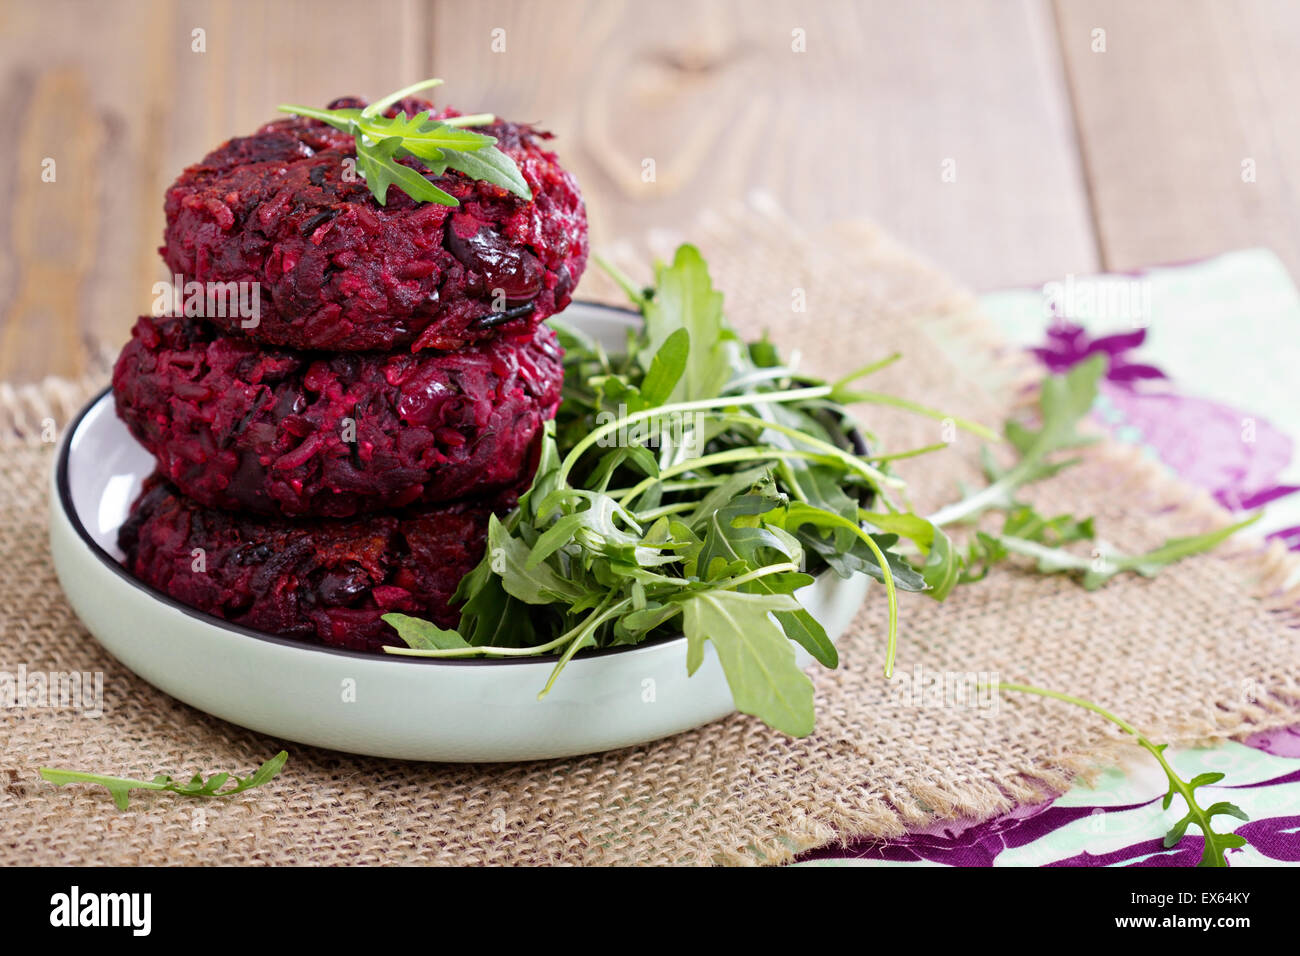 Beetroot vegan burgers with rice and red beans Stock Photo